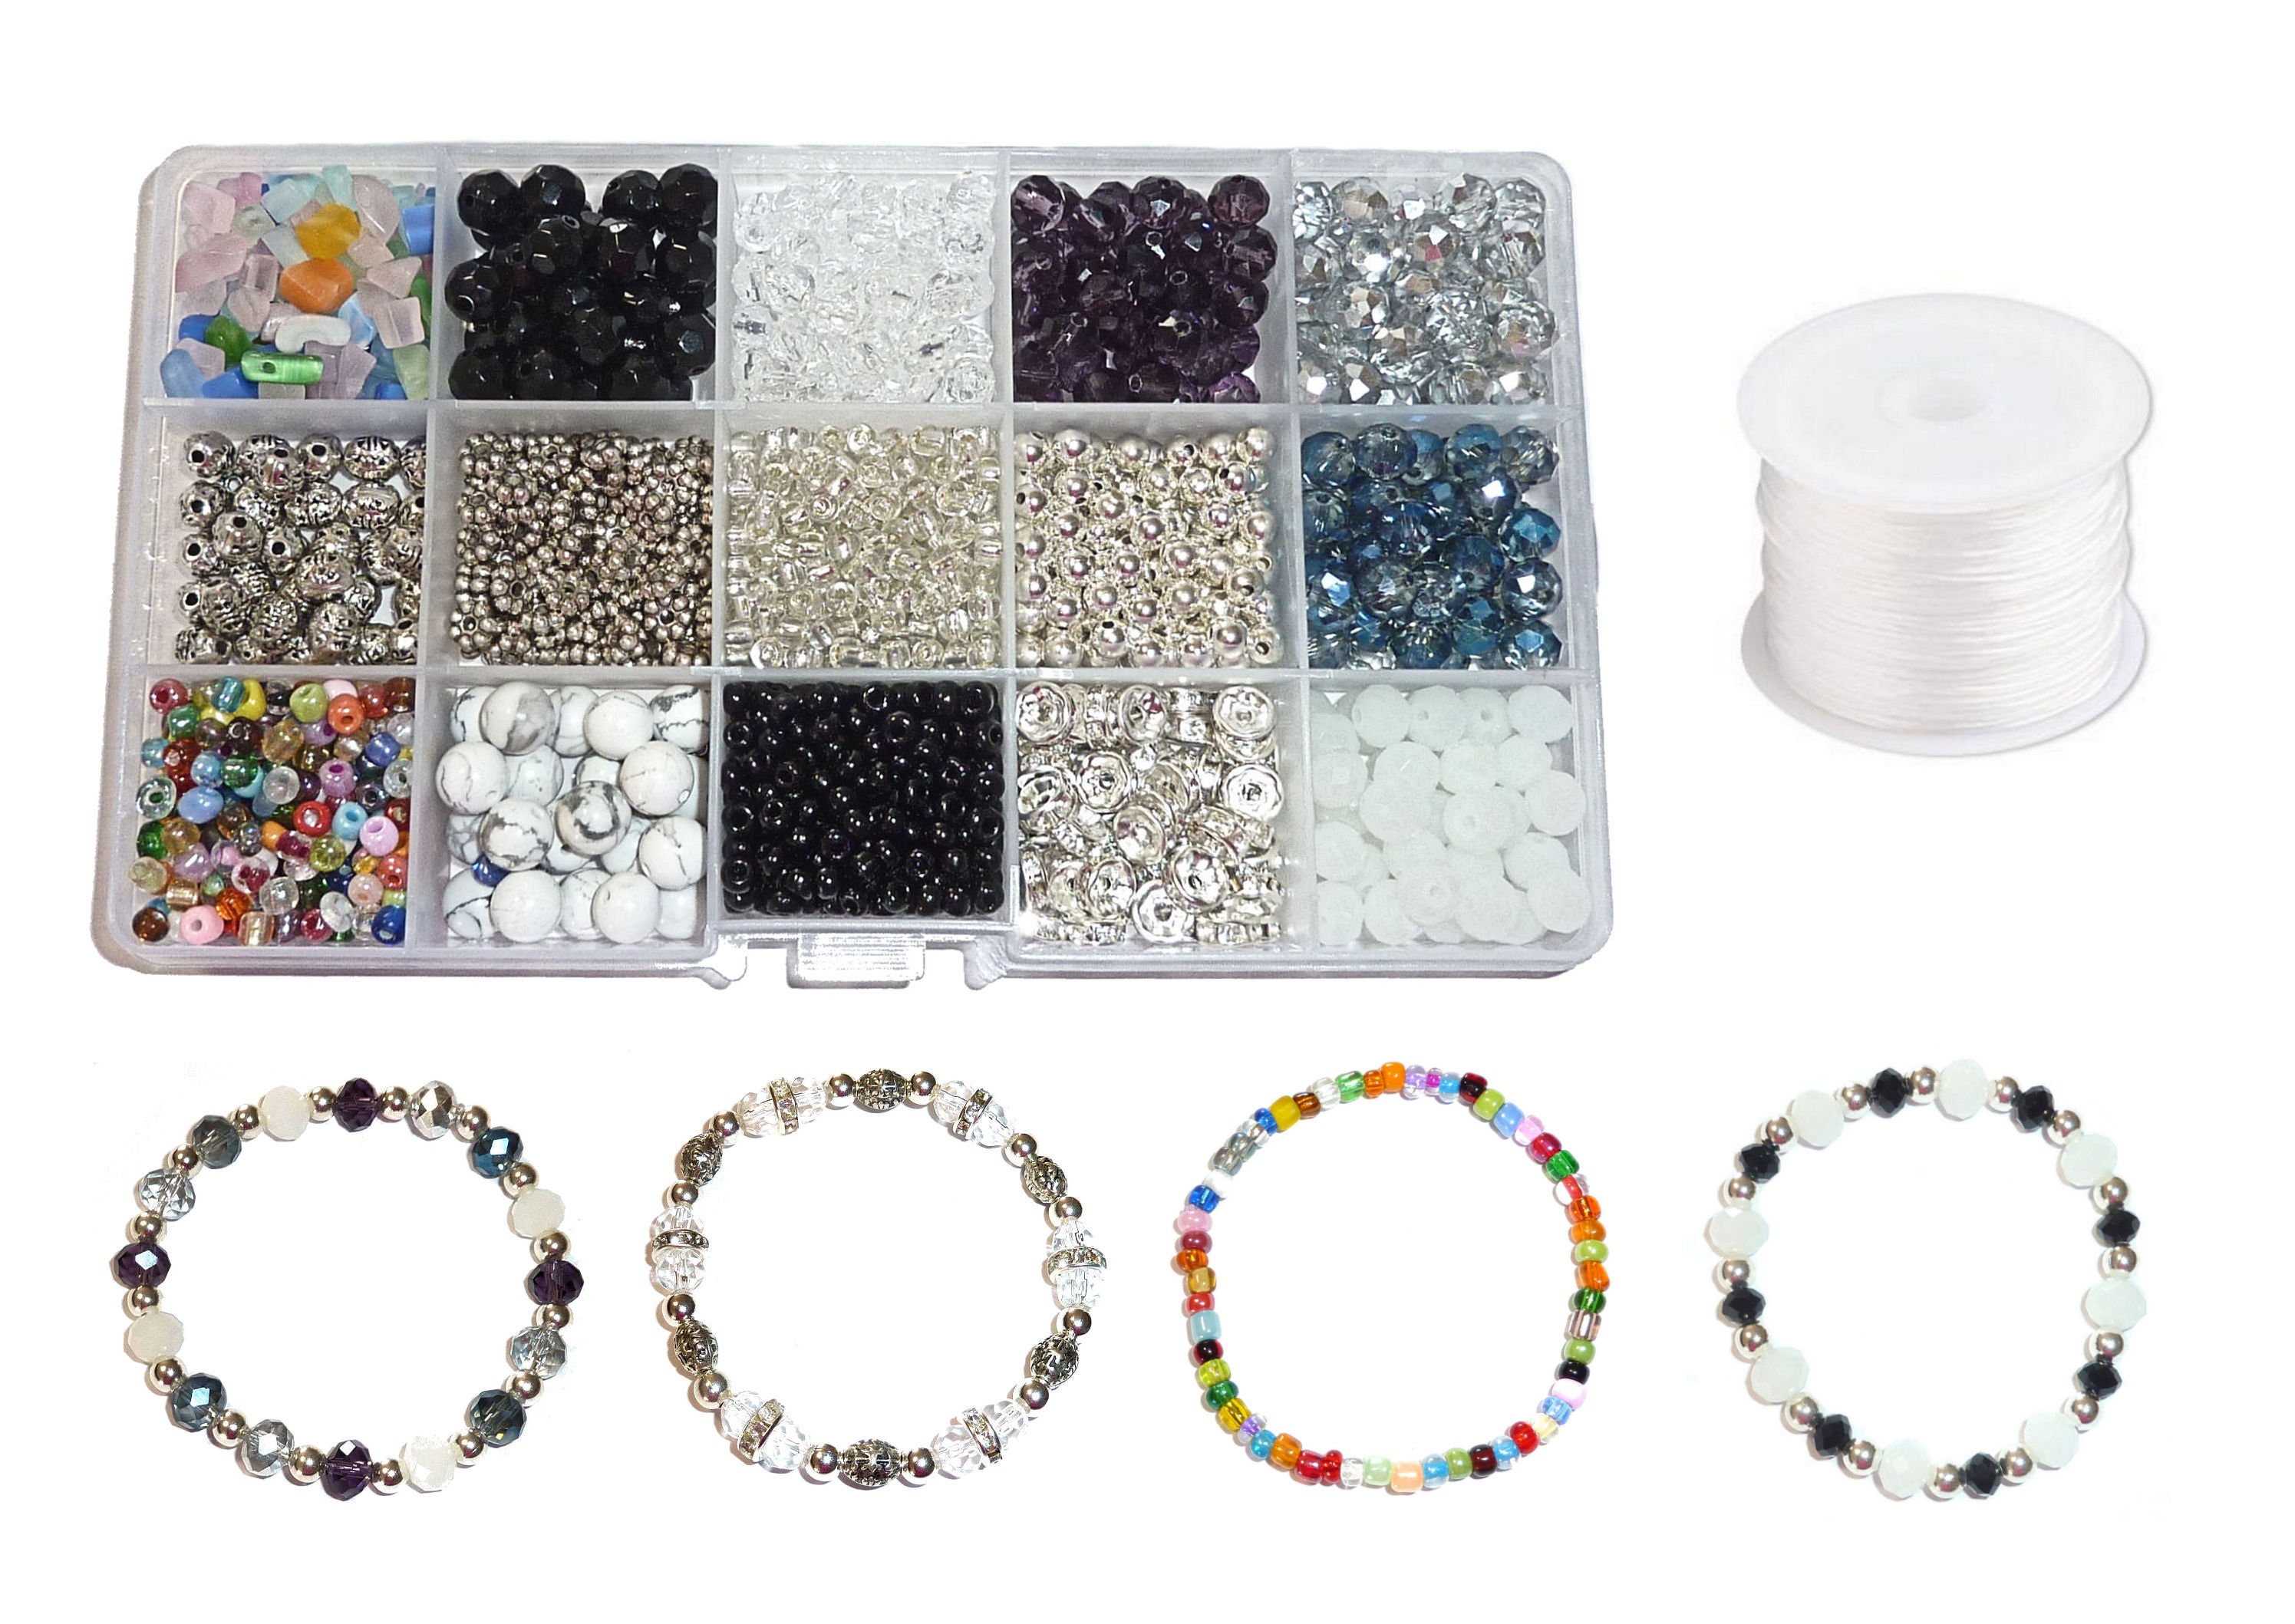 Jewelry Making Kit for Complete Bracelet Making Supplies Tool With